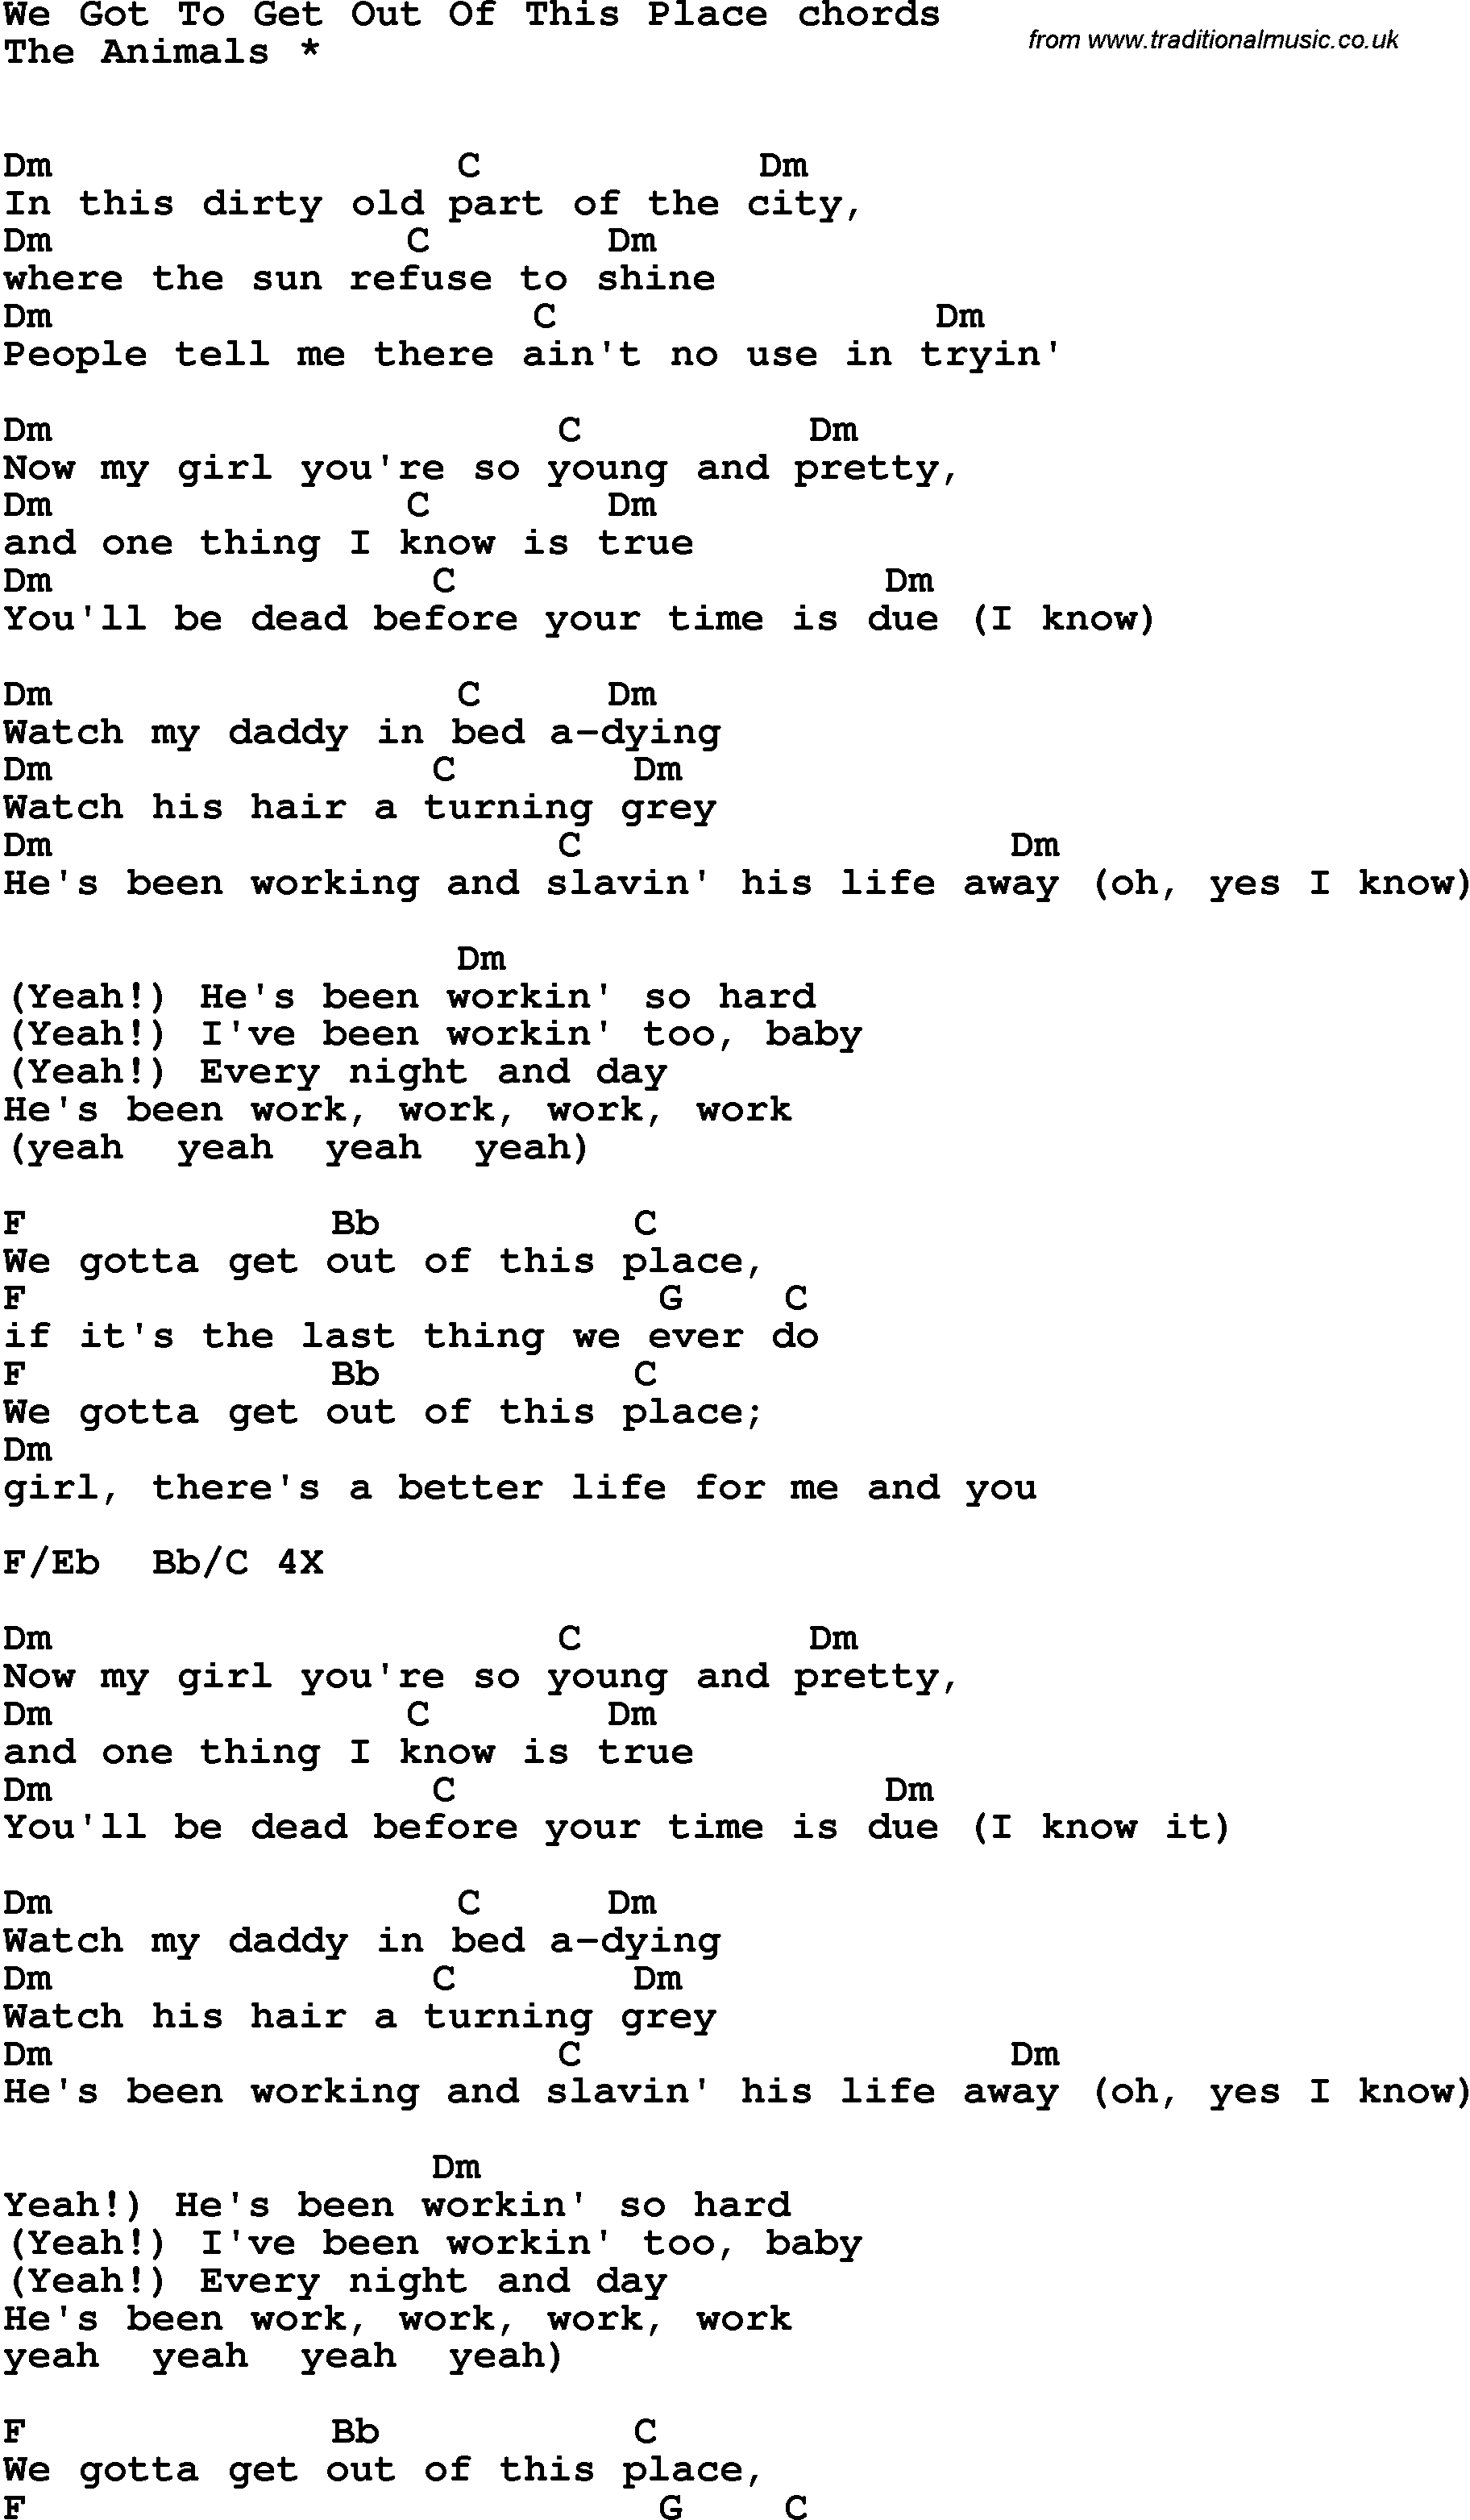 Song Lyrics with guitar chords for We Got To Get Out Of This Place